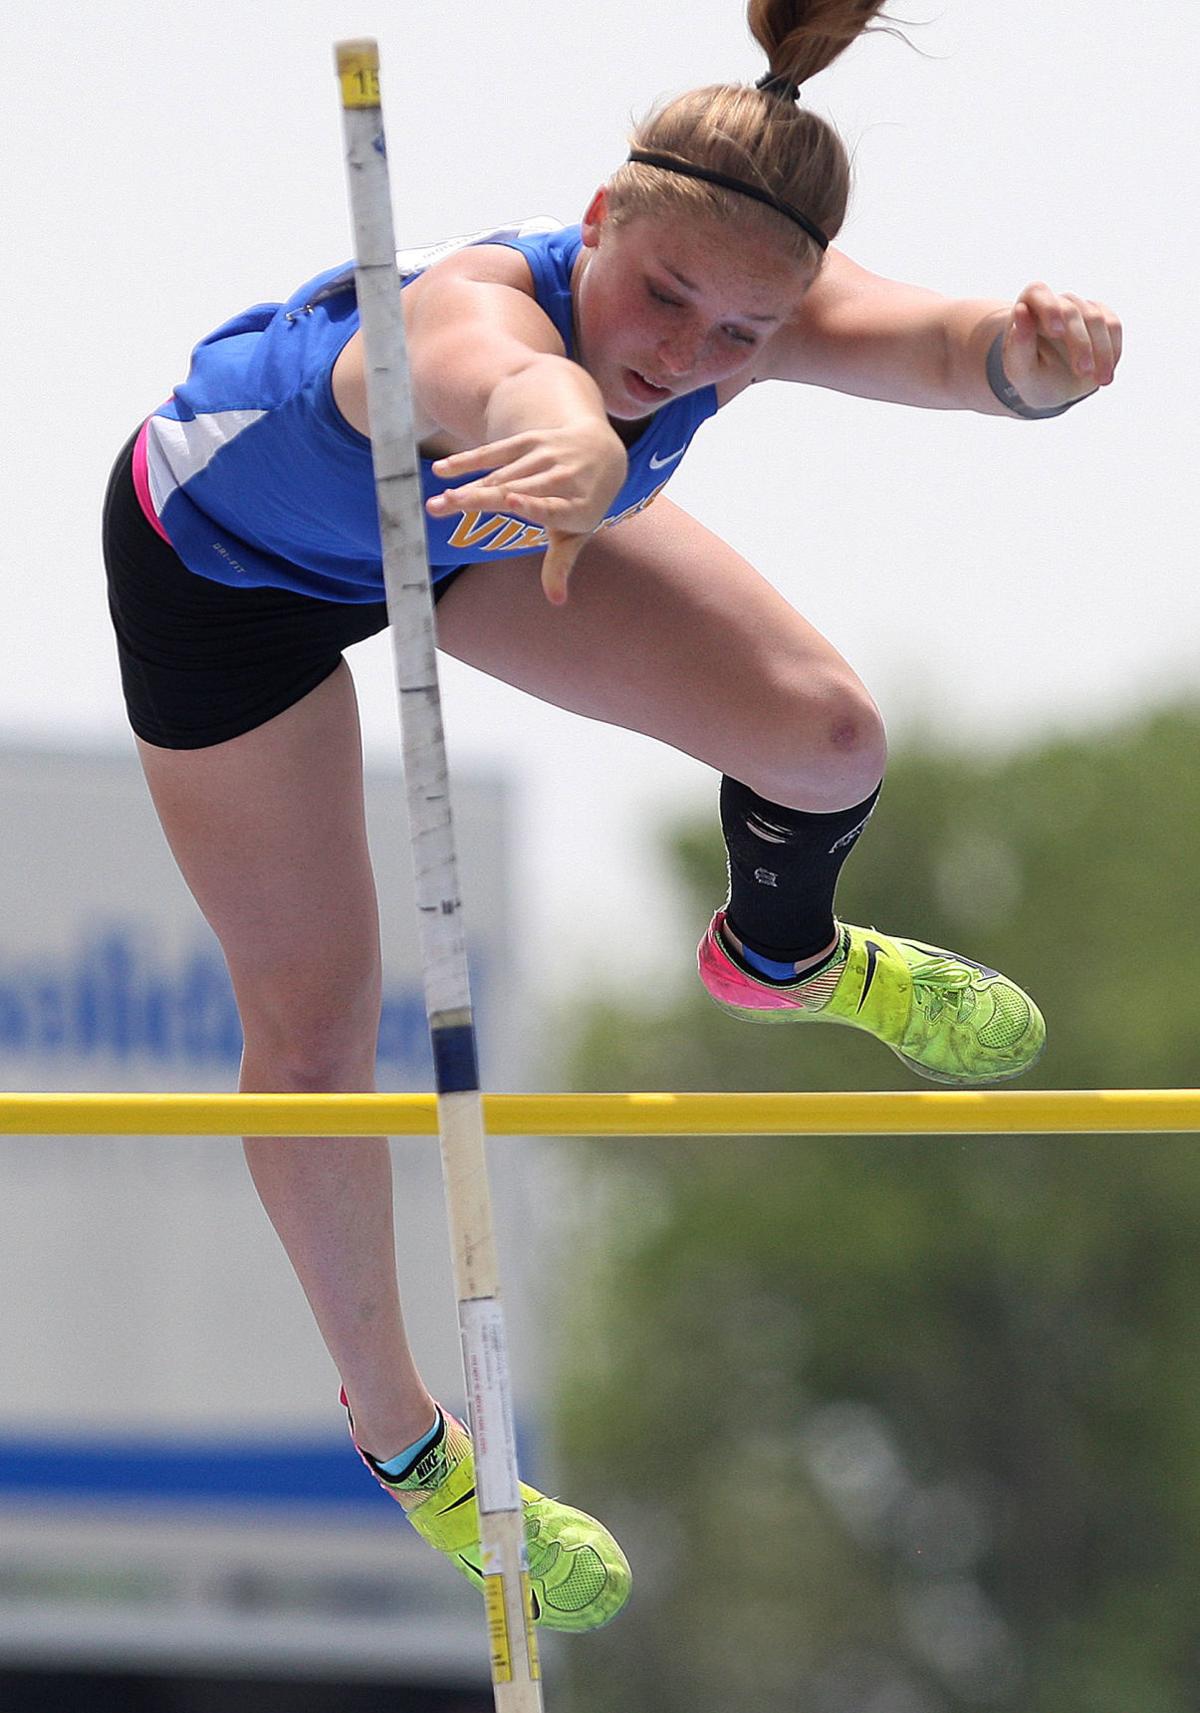 FOSTER VAULTS TO SIXTH OVERALL IN WOMEN'S POLE VAULT ON DAY 2 OF U